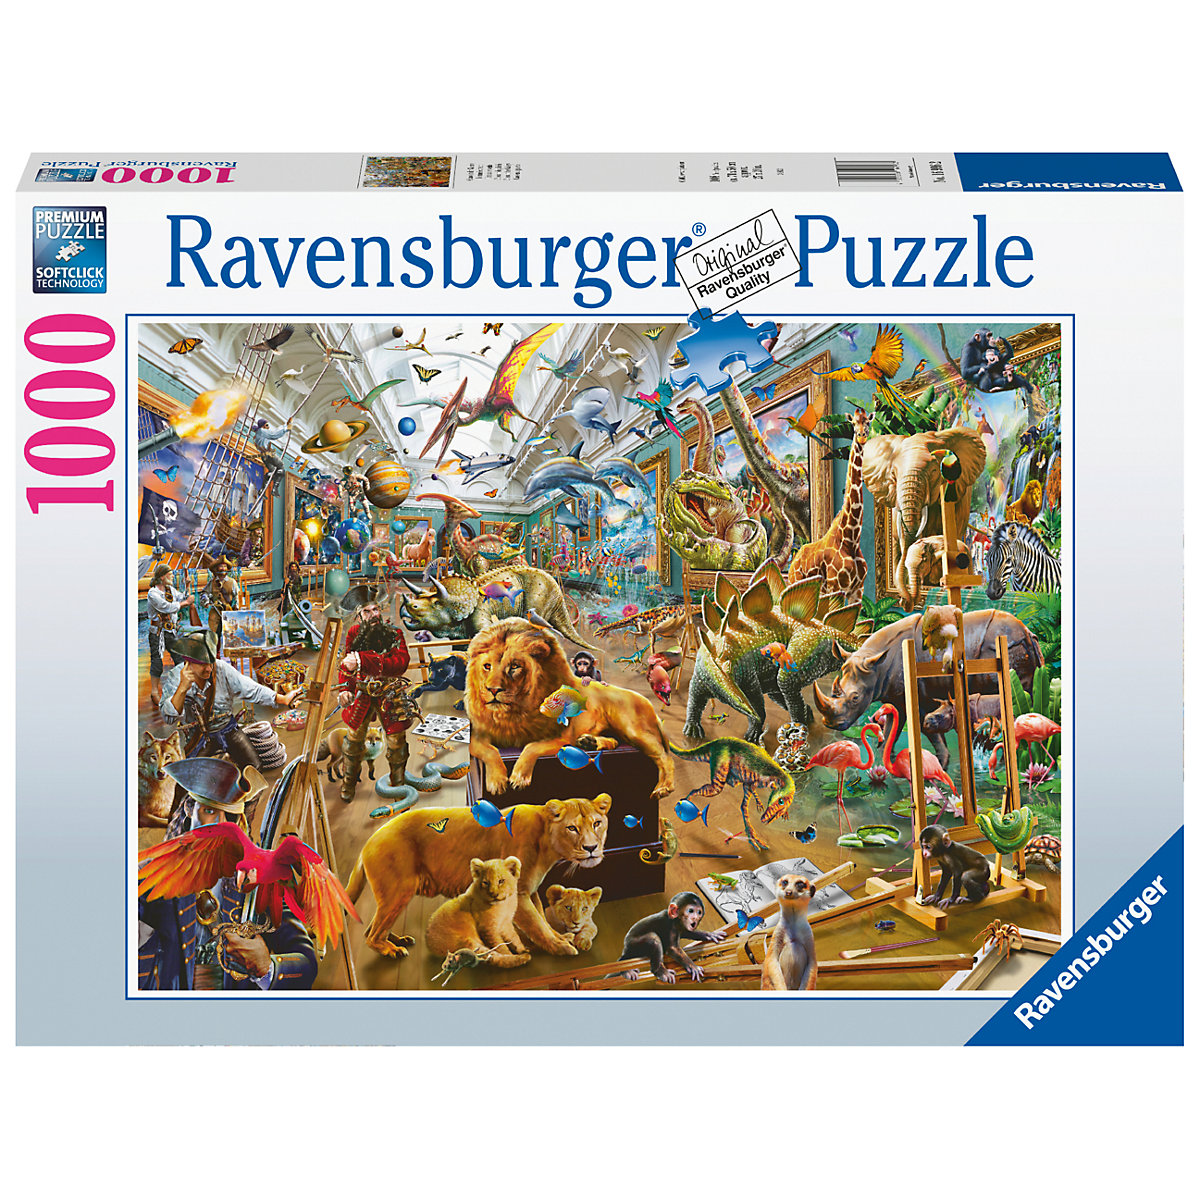 Ravensburger Puzzle Chaos in der Galerie 1000 Teile